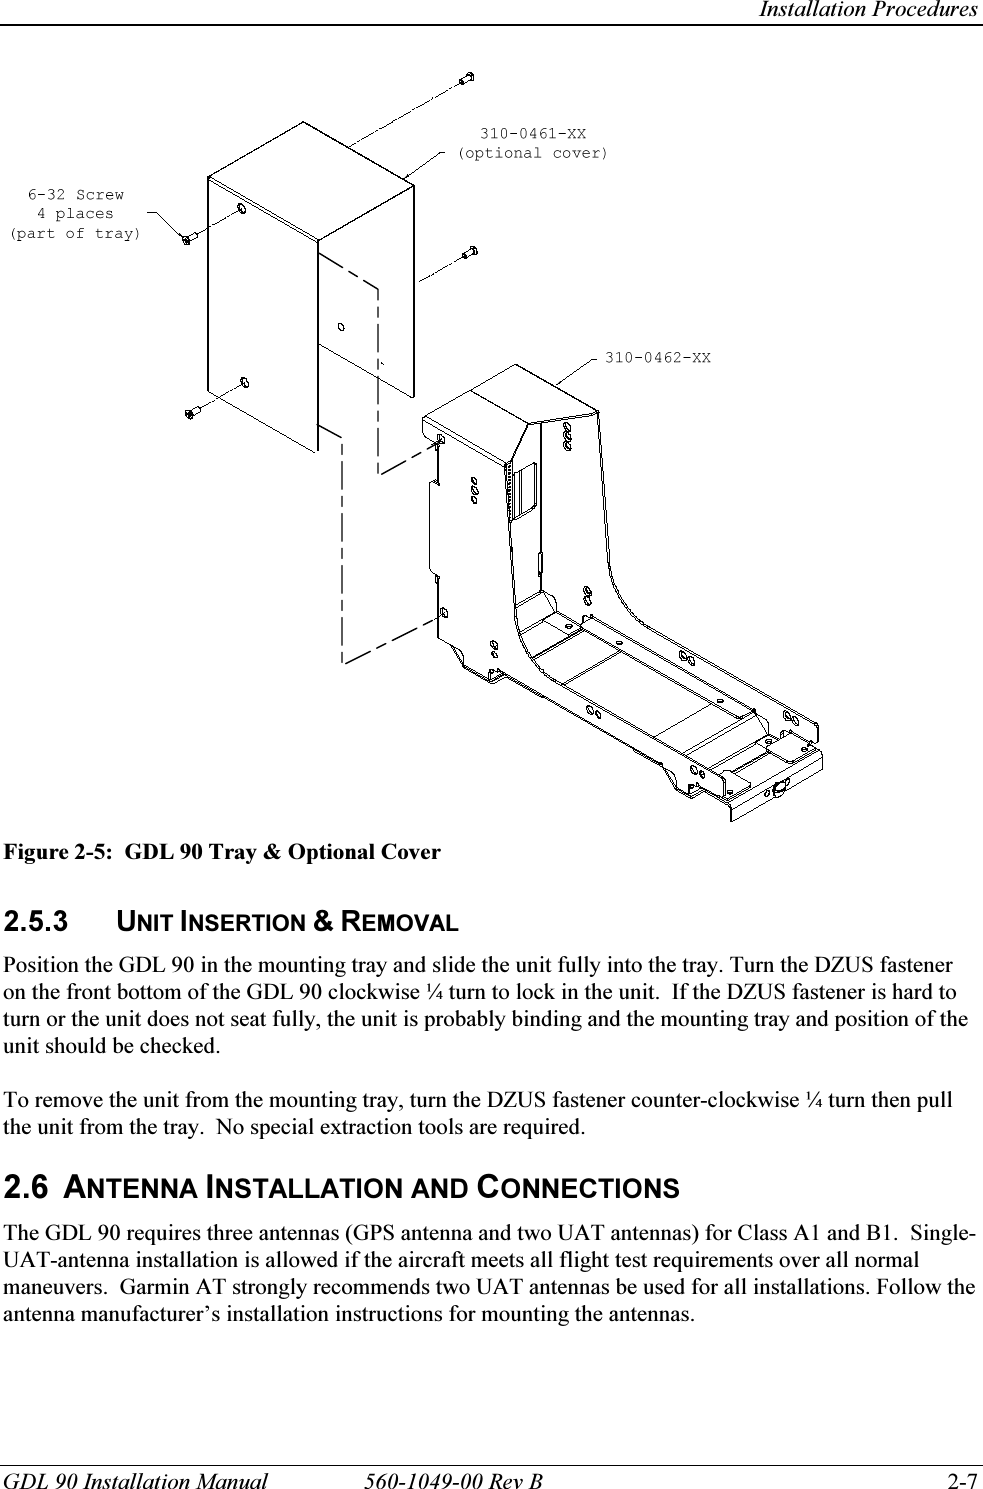   Installation Procedures GDL 90 Installation Manual  560-1049-00 Rev B    2-7  Figure 2-5:  GDL 90 Tray &amp; Optional Cover  2.5.3 UNIT INSERTION &amp; REMOVAL Position the GDL 90 in the mounting tray and slide the unit fully into the tray. Turn the DZUS fastener on the front bottom of the GDL 90 clockwise ¼ turn to lock in the unit.  If the DZUS fastener is hard to turn or the unit does not seat fully, the unit is probably binding and the mounting tray and position of the unit should be checked.   To remove the unit from the mounting tray, turn the DZUS fastener counter-clockwise ¼ turn then pull the unit from the tray.  No special extraction tools are required.   2.6 ANTENNA INSTALLATION AND CONNECTIONS The GDL 90 requires three antennas (GPS antenna and two UAT antennas) for Class A1 and B1.  Single-UAT-antenna installation is allowed if the aircraft meets all flight test requirements over all normal maneuvers.  Garmin AT strongly recommends two UAT antennas be used for all installations. Follow the antenna manufacturer’s installation instructions for mounting the antennas.    